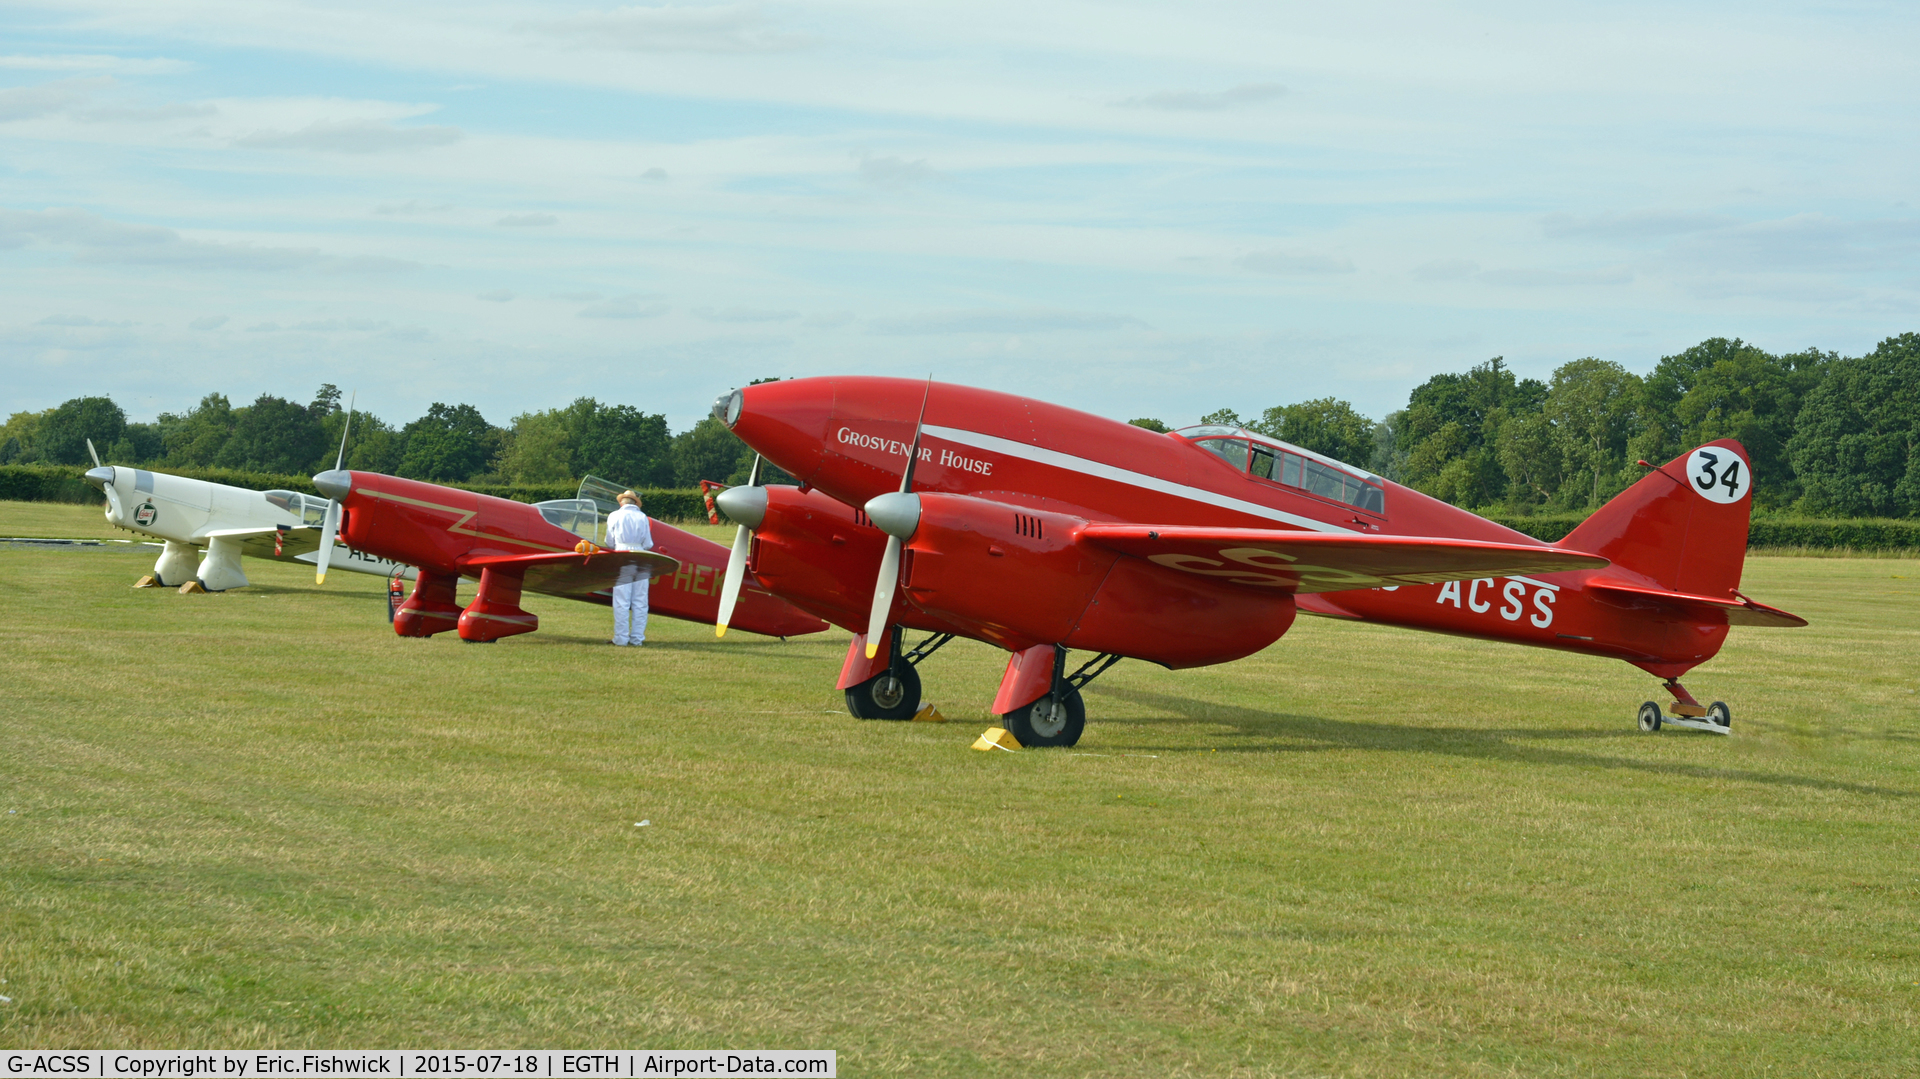 G-ACSS, 1934 De Havilland DH-88 Comet C/N 1996, 5. Iconic 'Grosvenor House' with the racing Mew Gulls at Shuttleworth Best of British Airshow, July 2015.